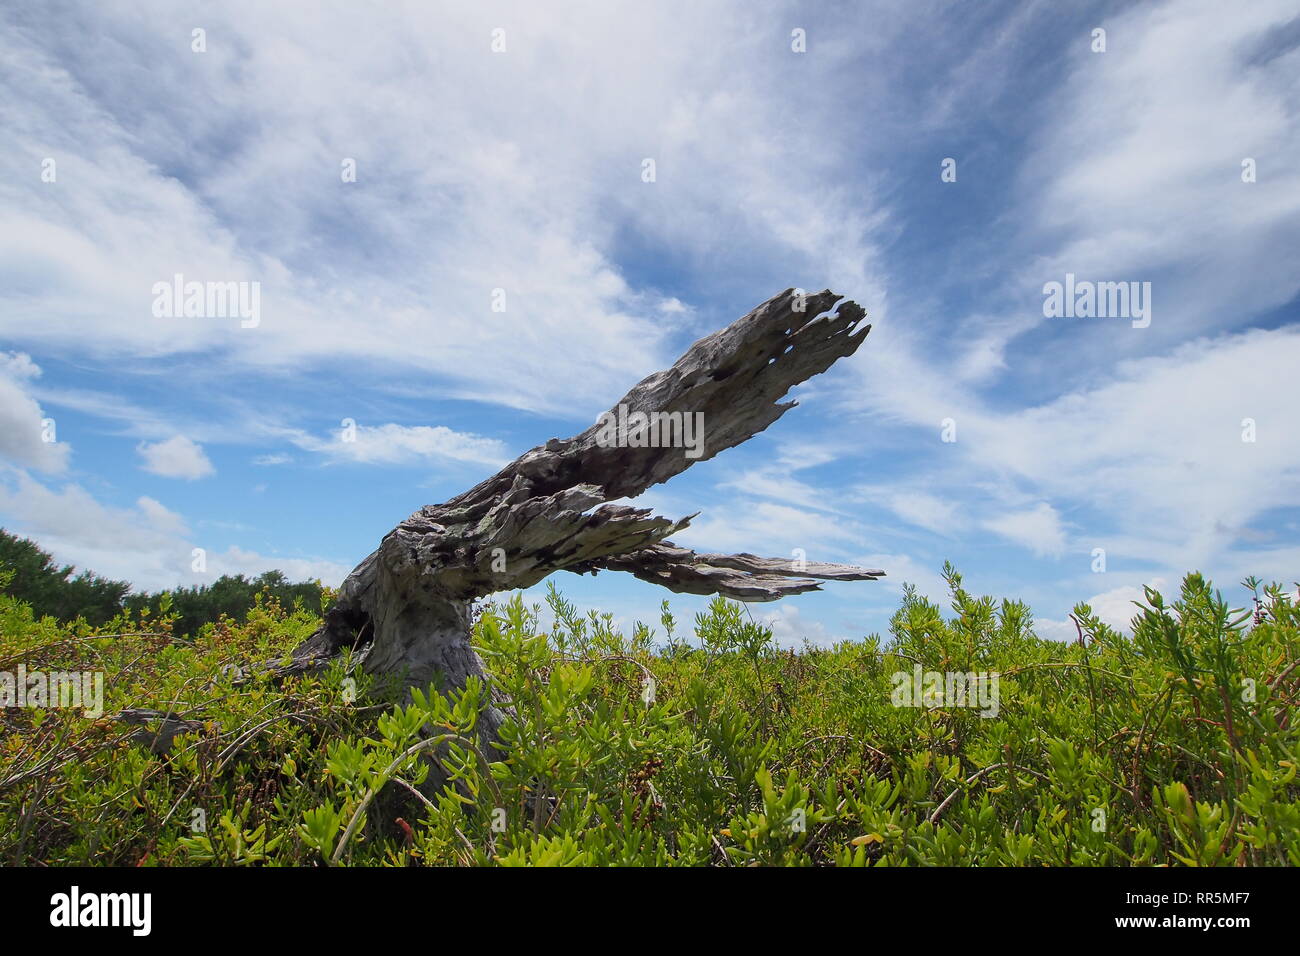 A weathered snag reminiscent of alligator jaws in the saltwort fields of the Coastal Paririe in Everglades National Park, Florida. Stock Photo